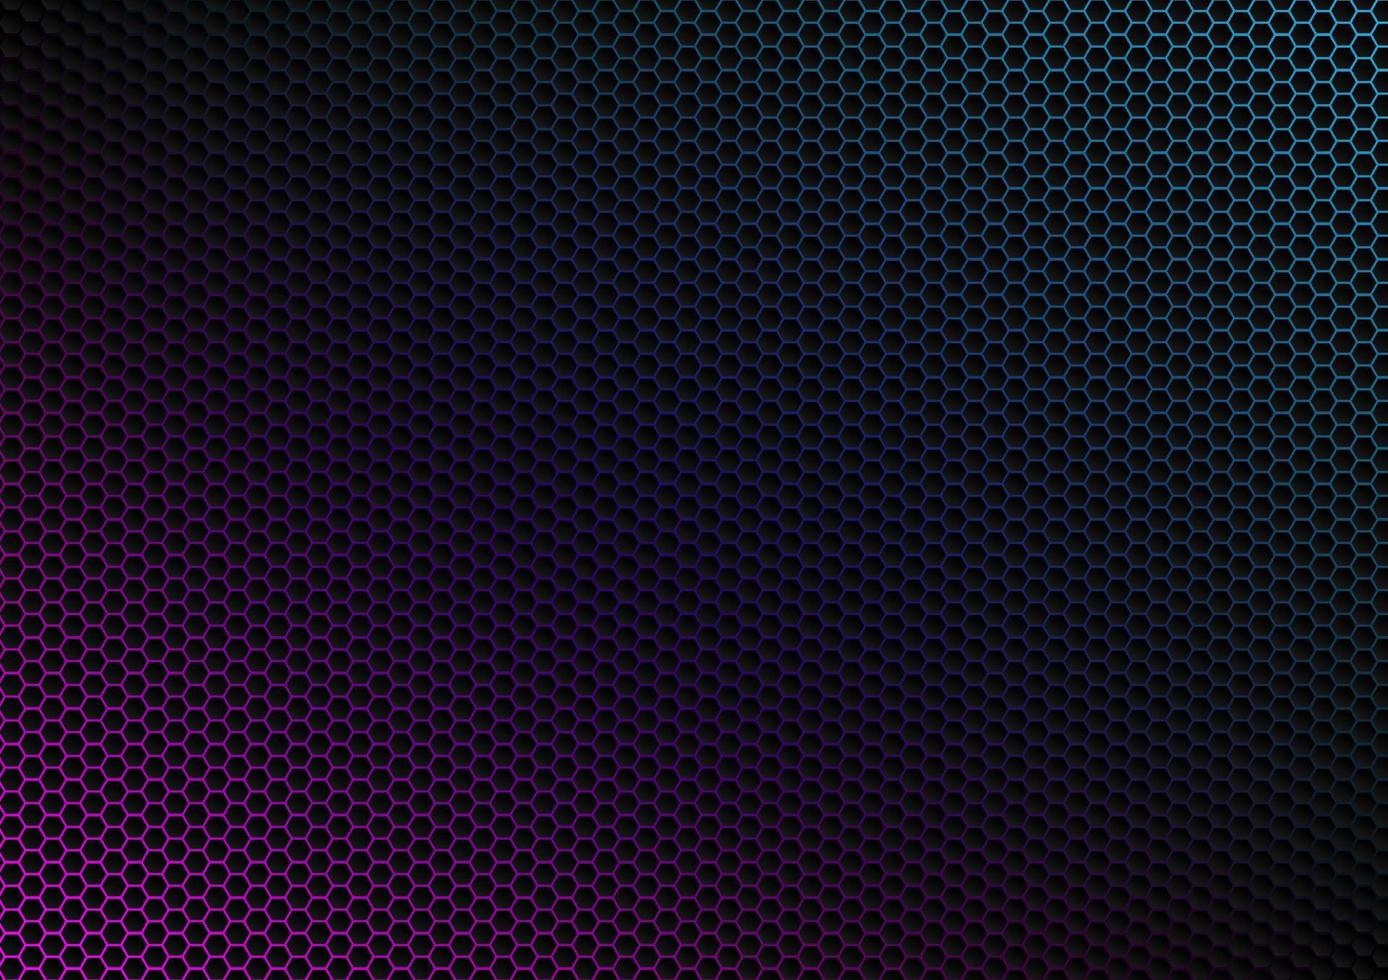 Dark hexagon abstract technology background with blue and pink colored under hexagon. Hive wallpaper or texture vector. vector